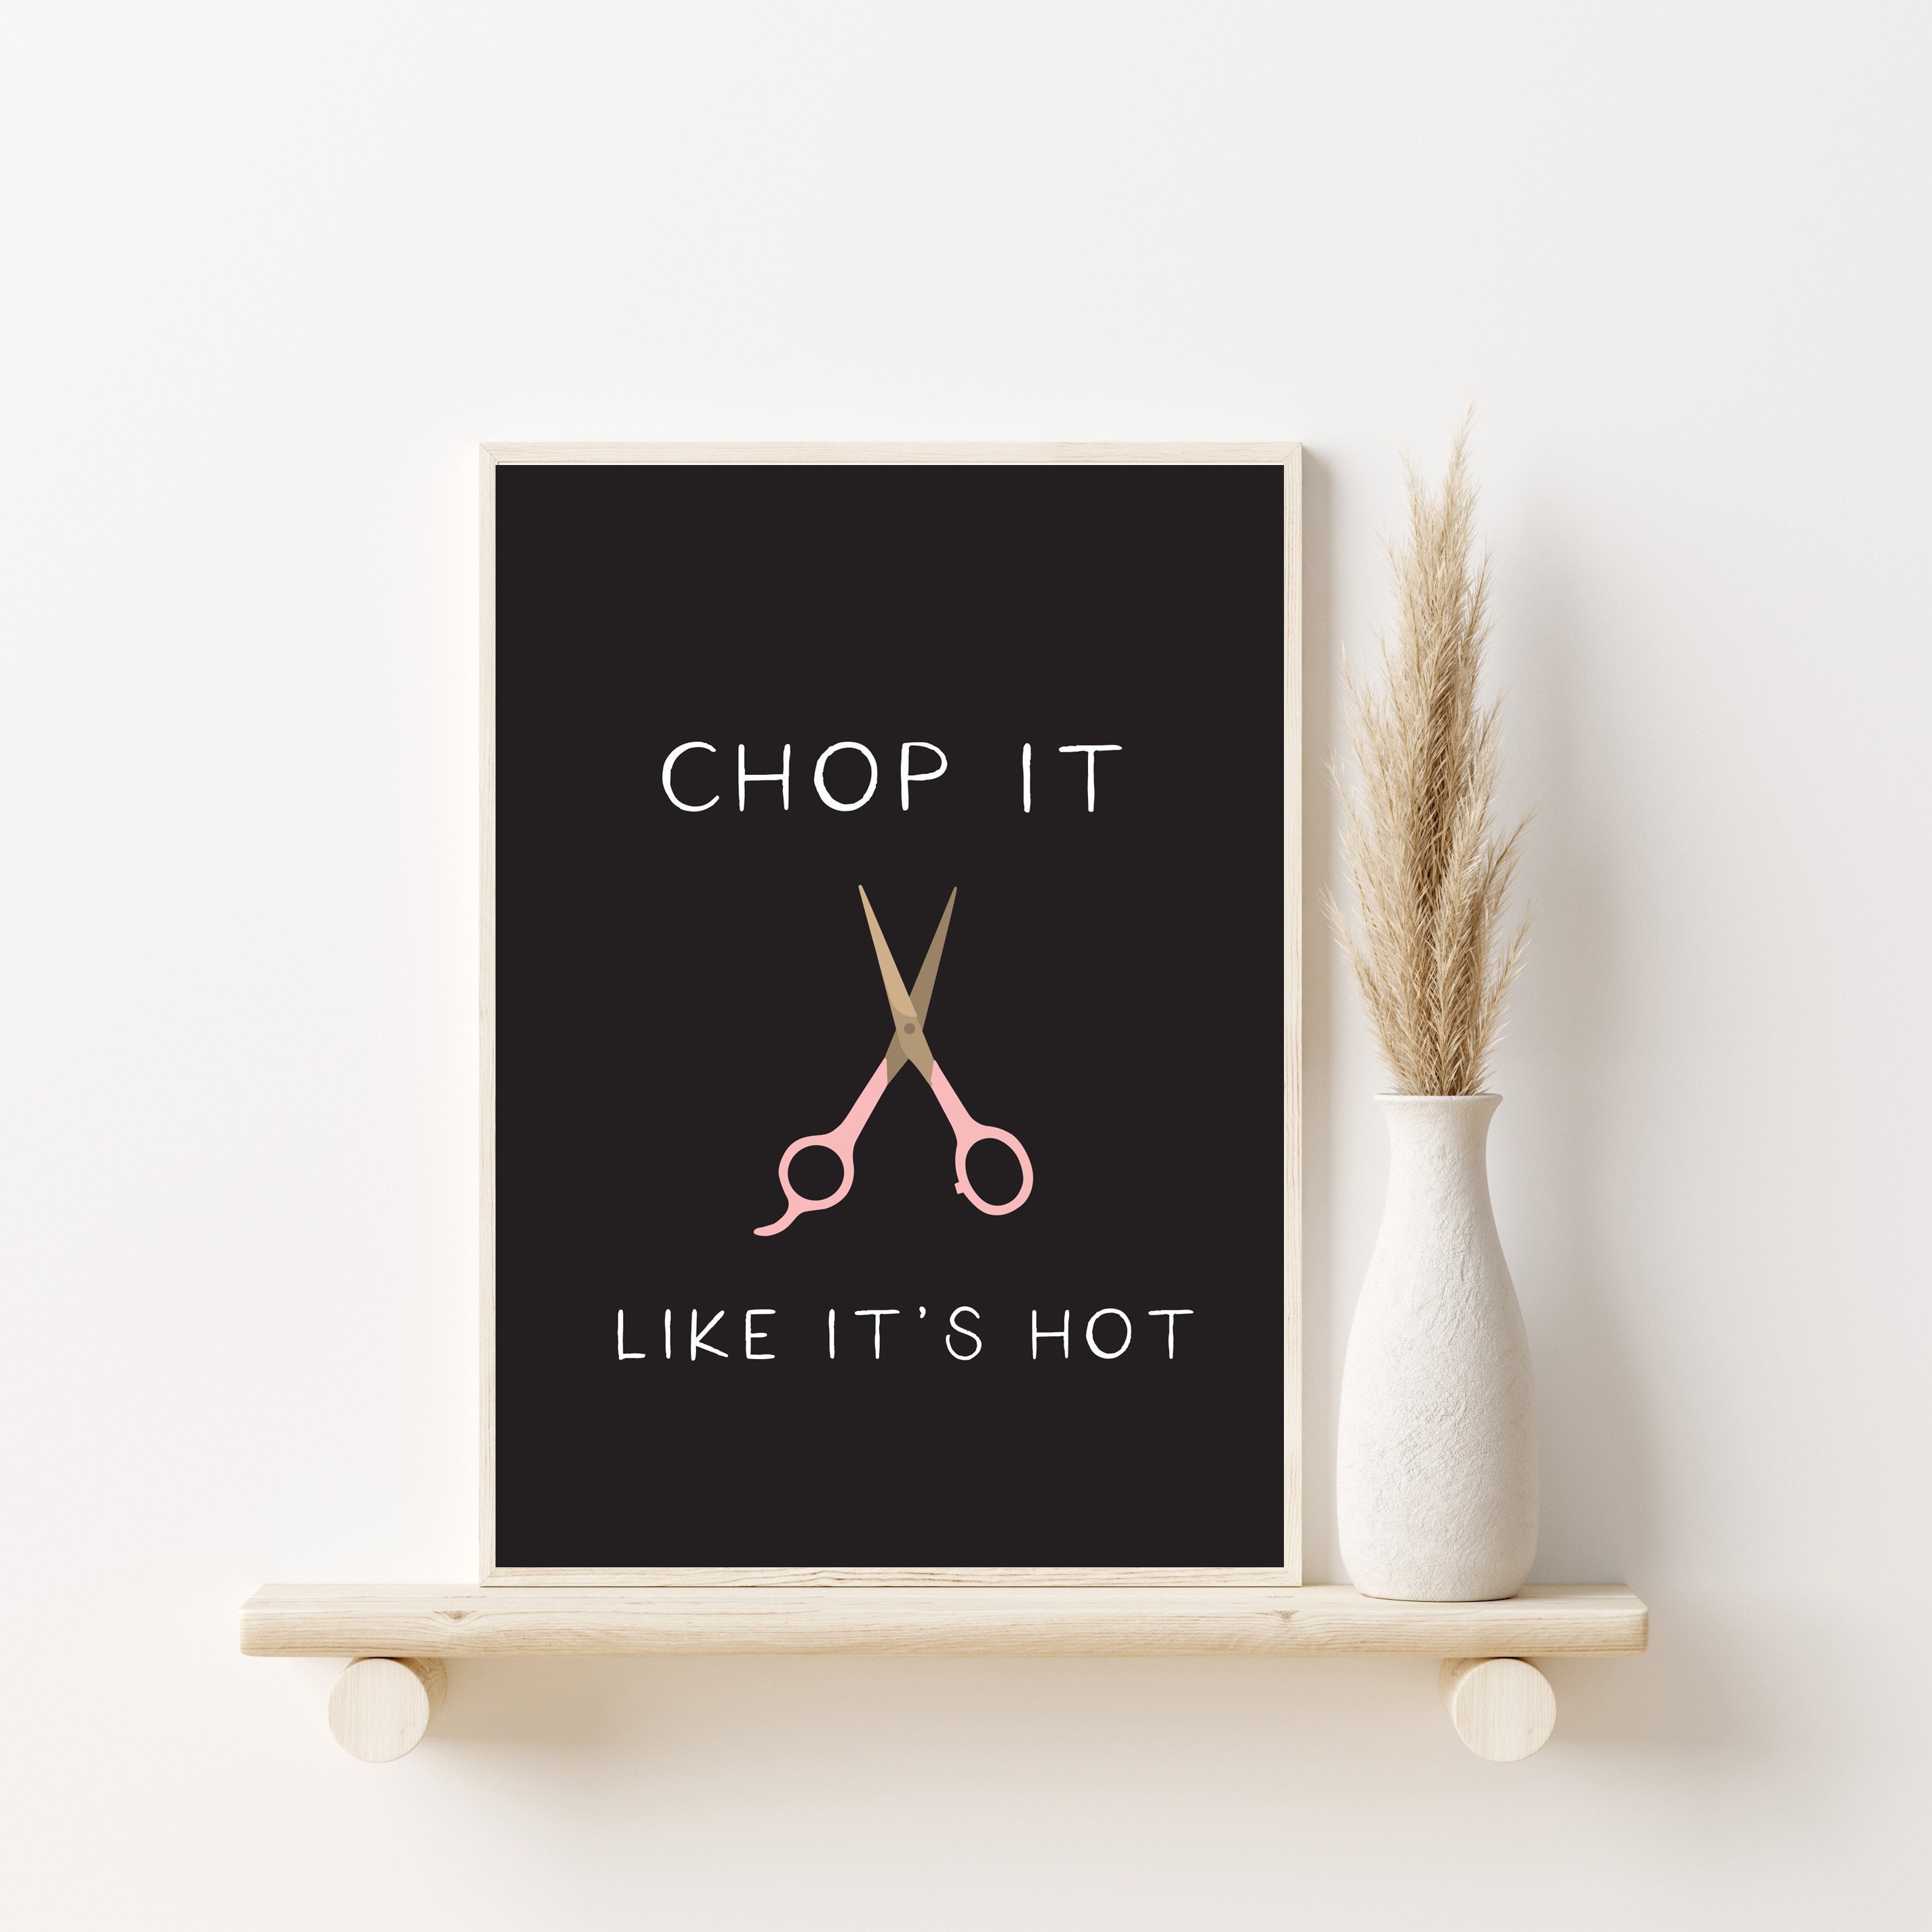 Fun Novelty Picture Frame for Hairstylists